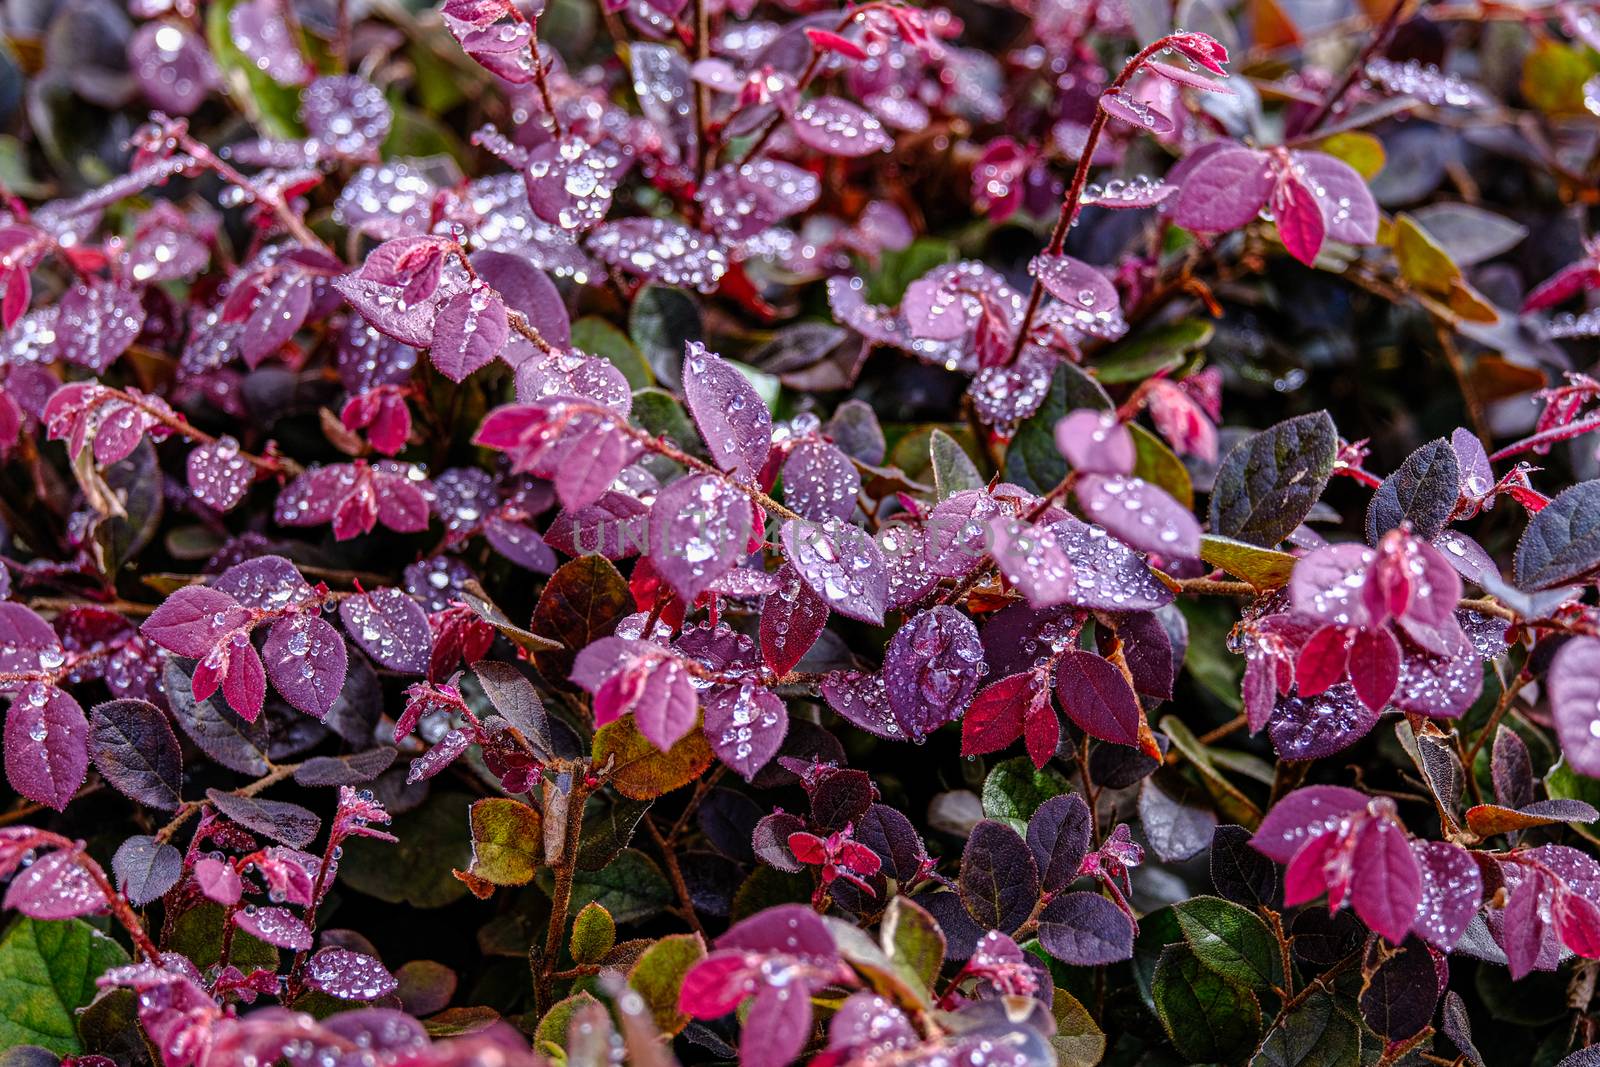 Water Drops on Red Leaves in Autumn